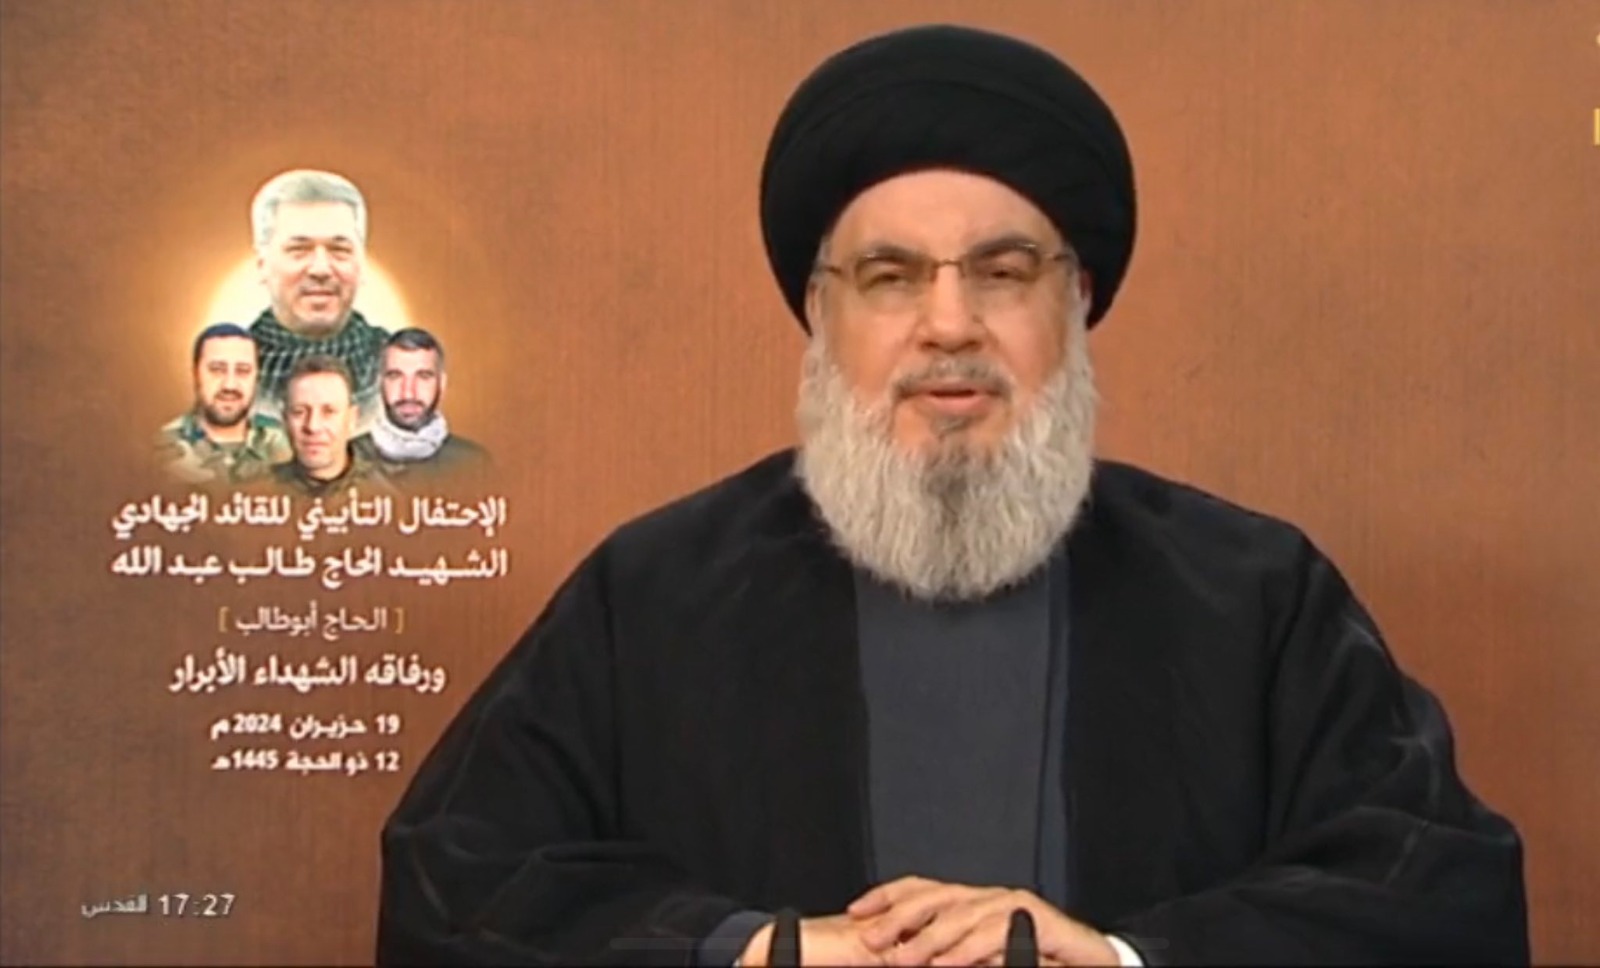 Nasrallah says war with Israel may expand to the Mediterranean, singles out Cyprus